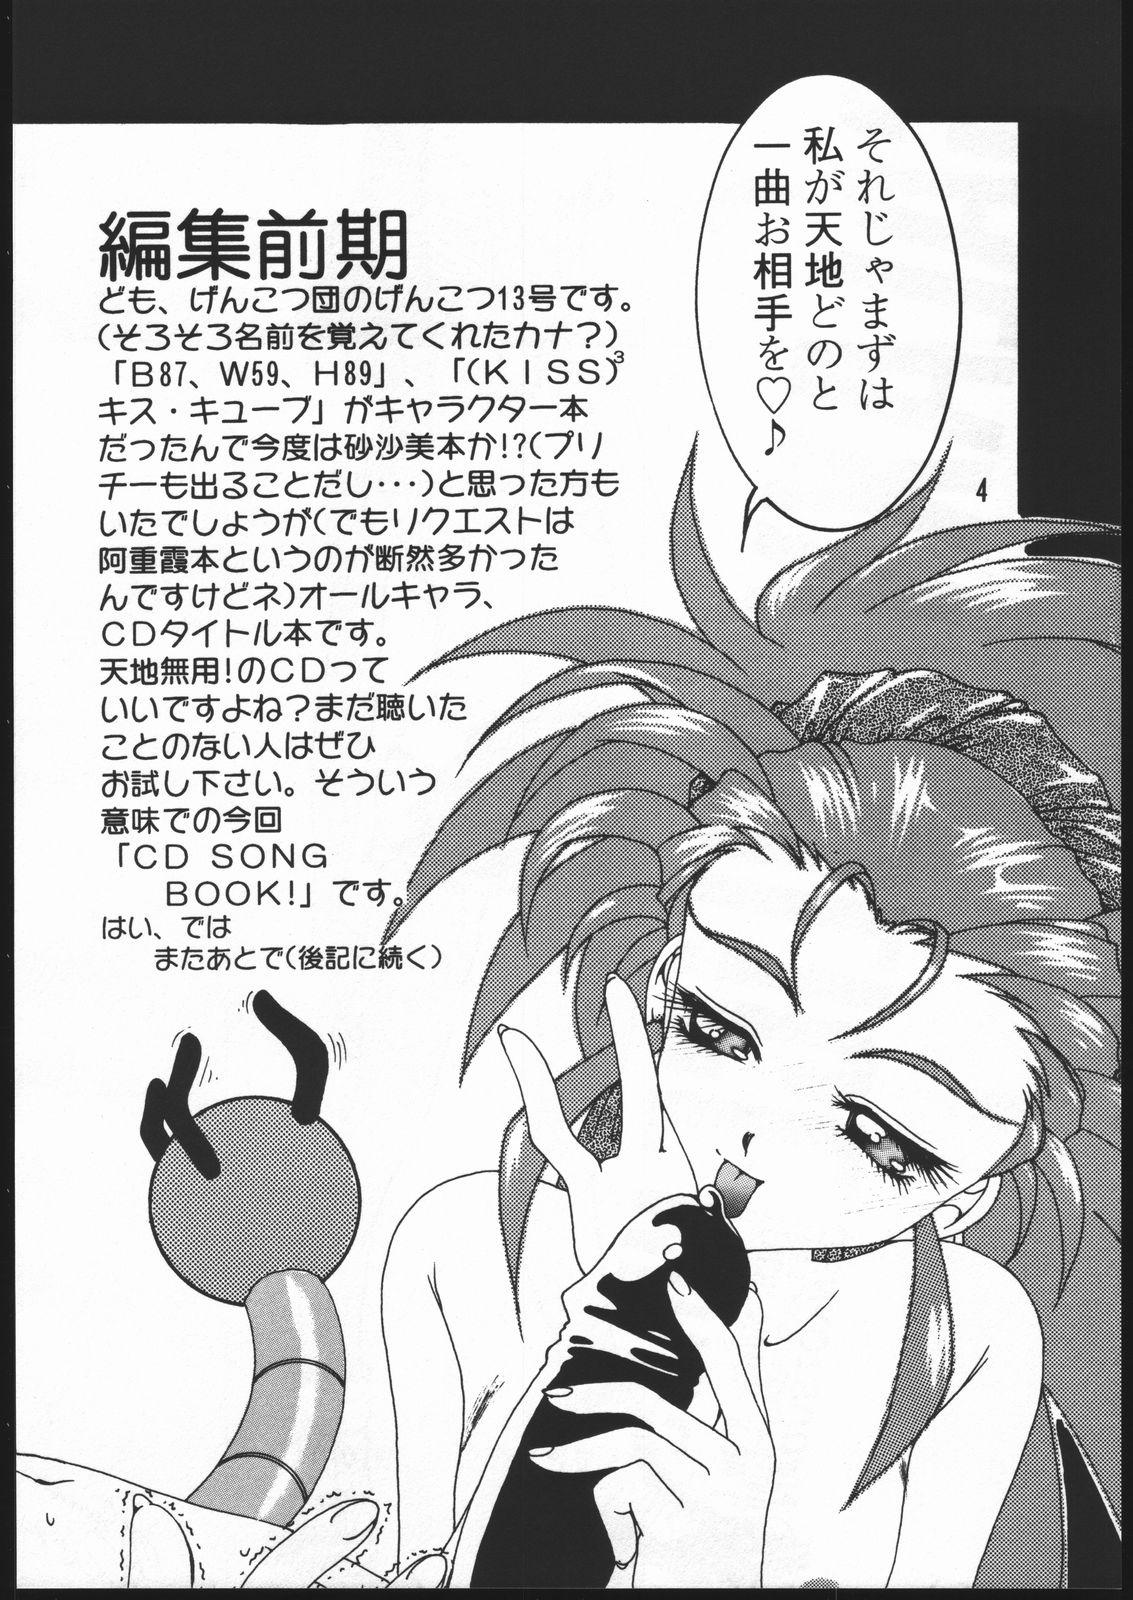 Double CD SONG BOOK - Tenchi muyo Dirty - Page 3